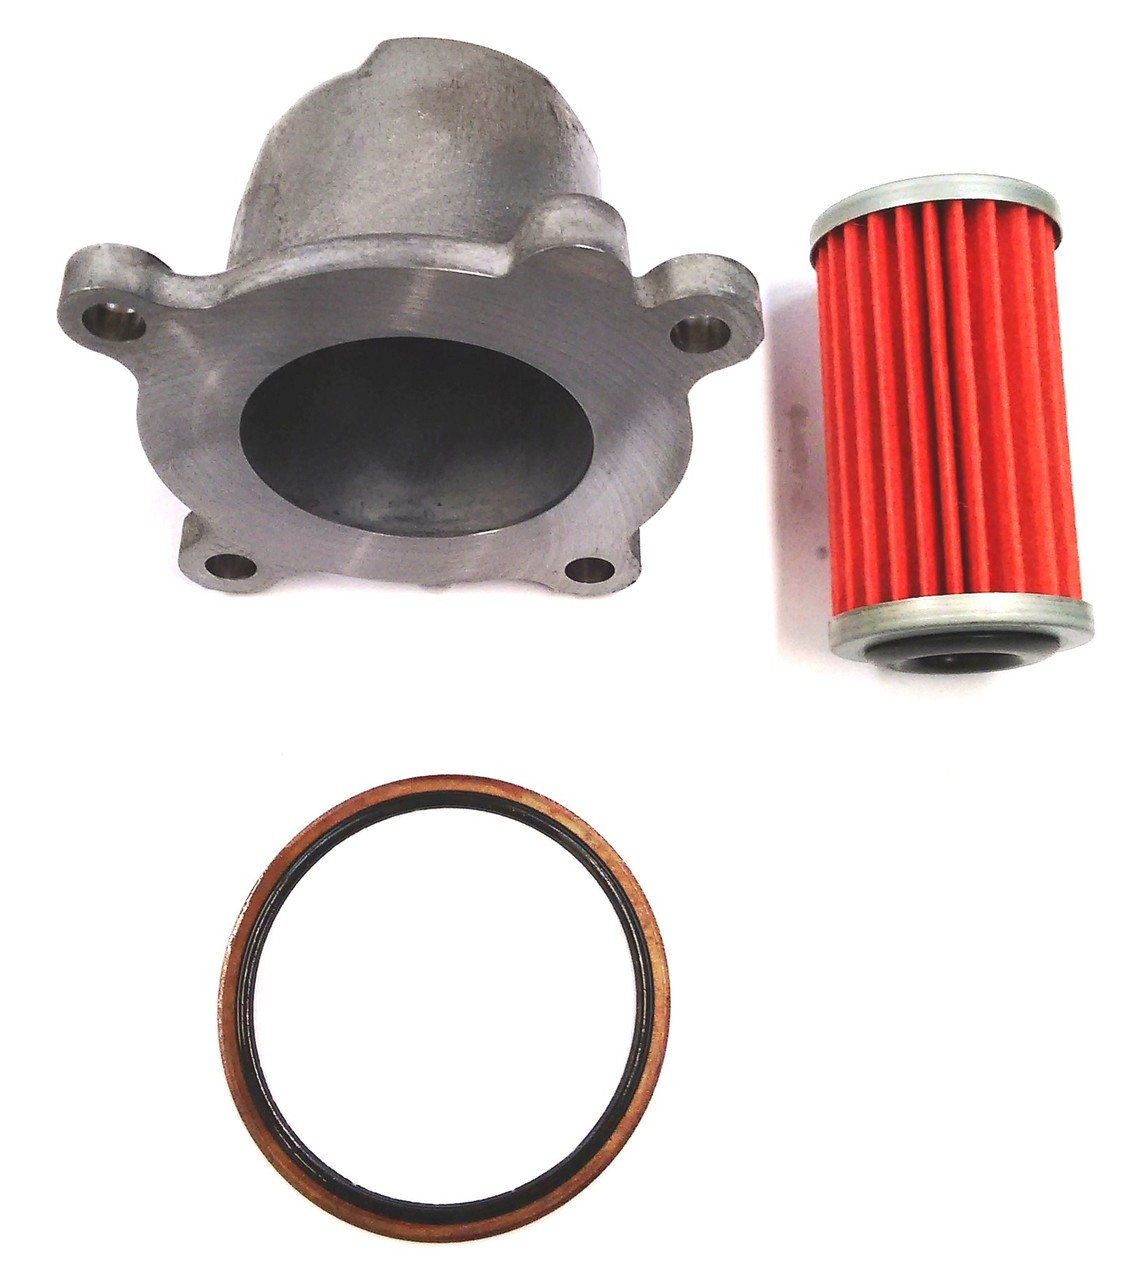 External oil filter cartride and Housing